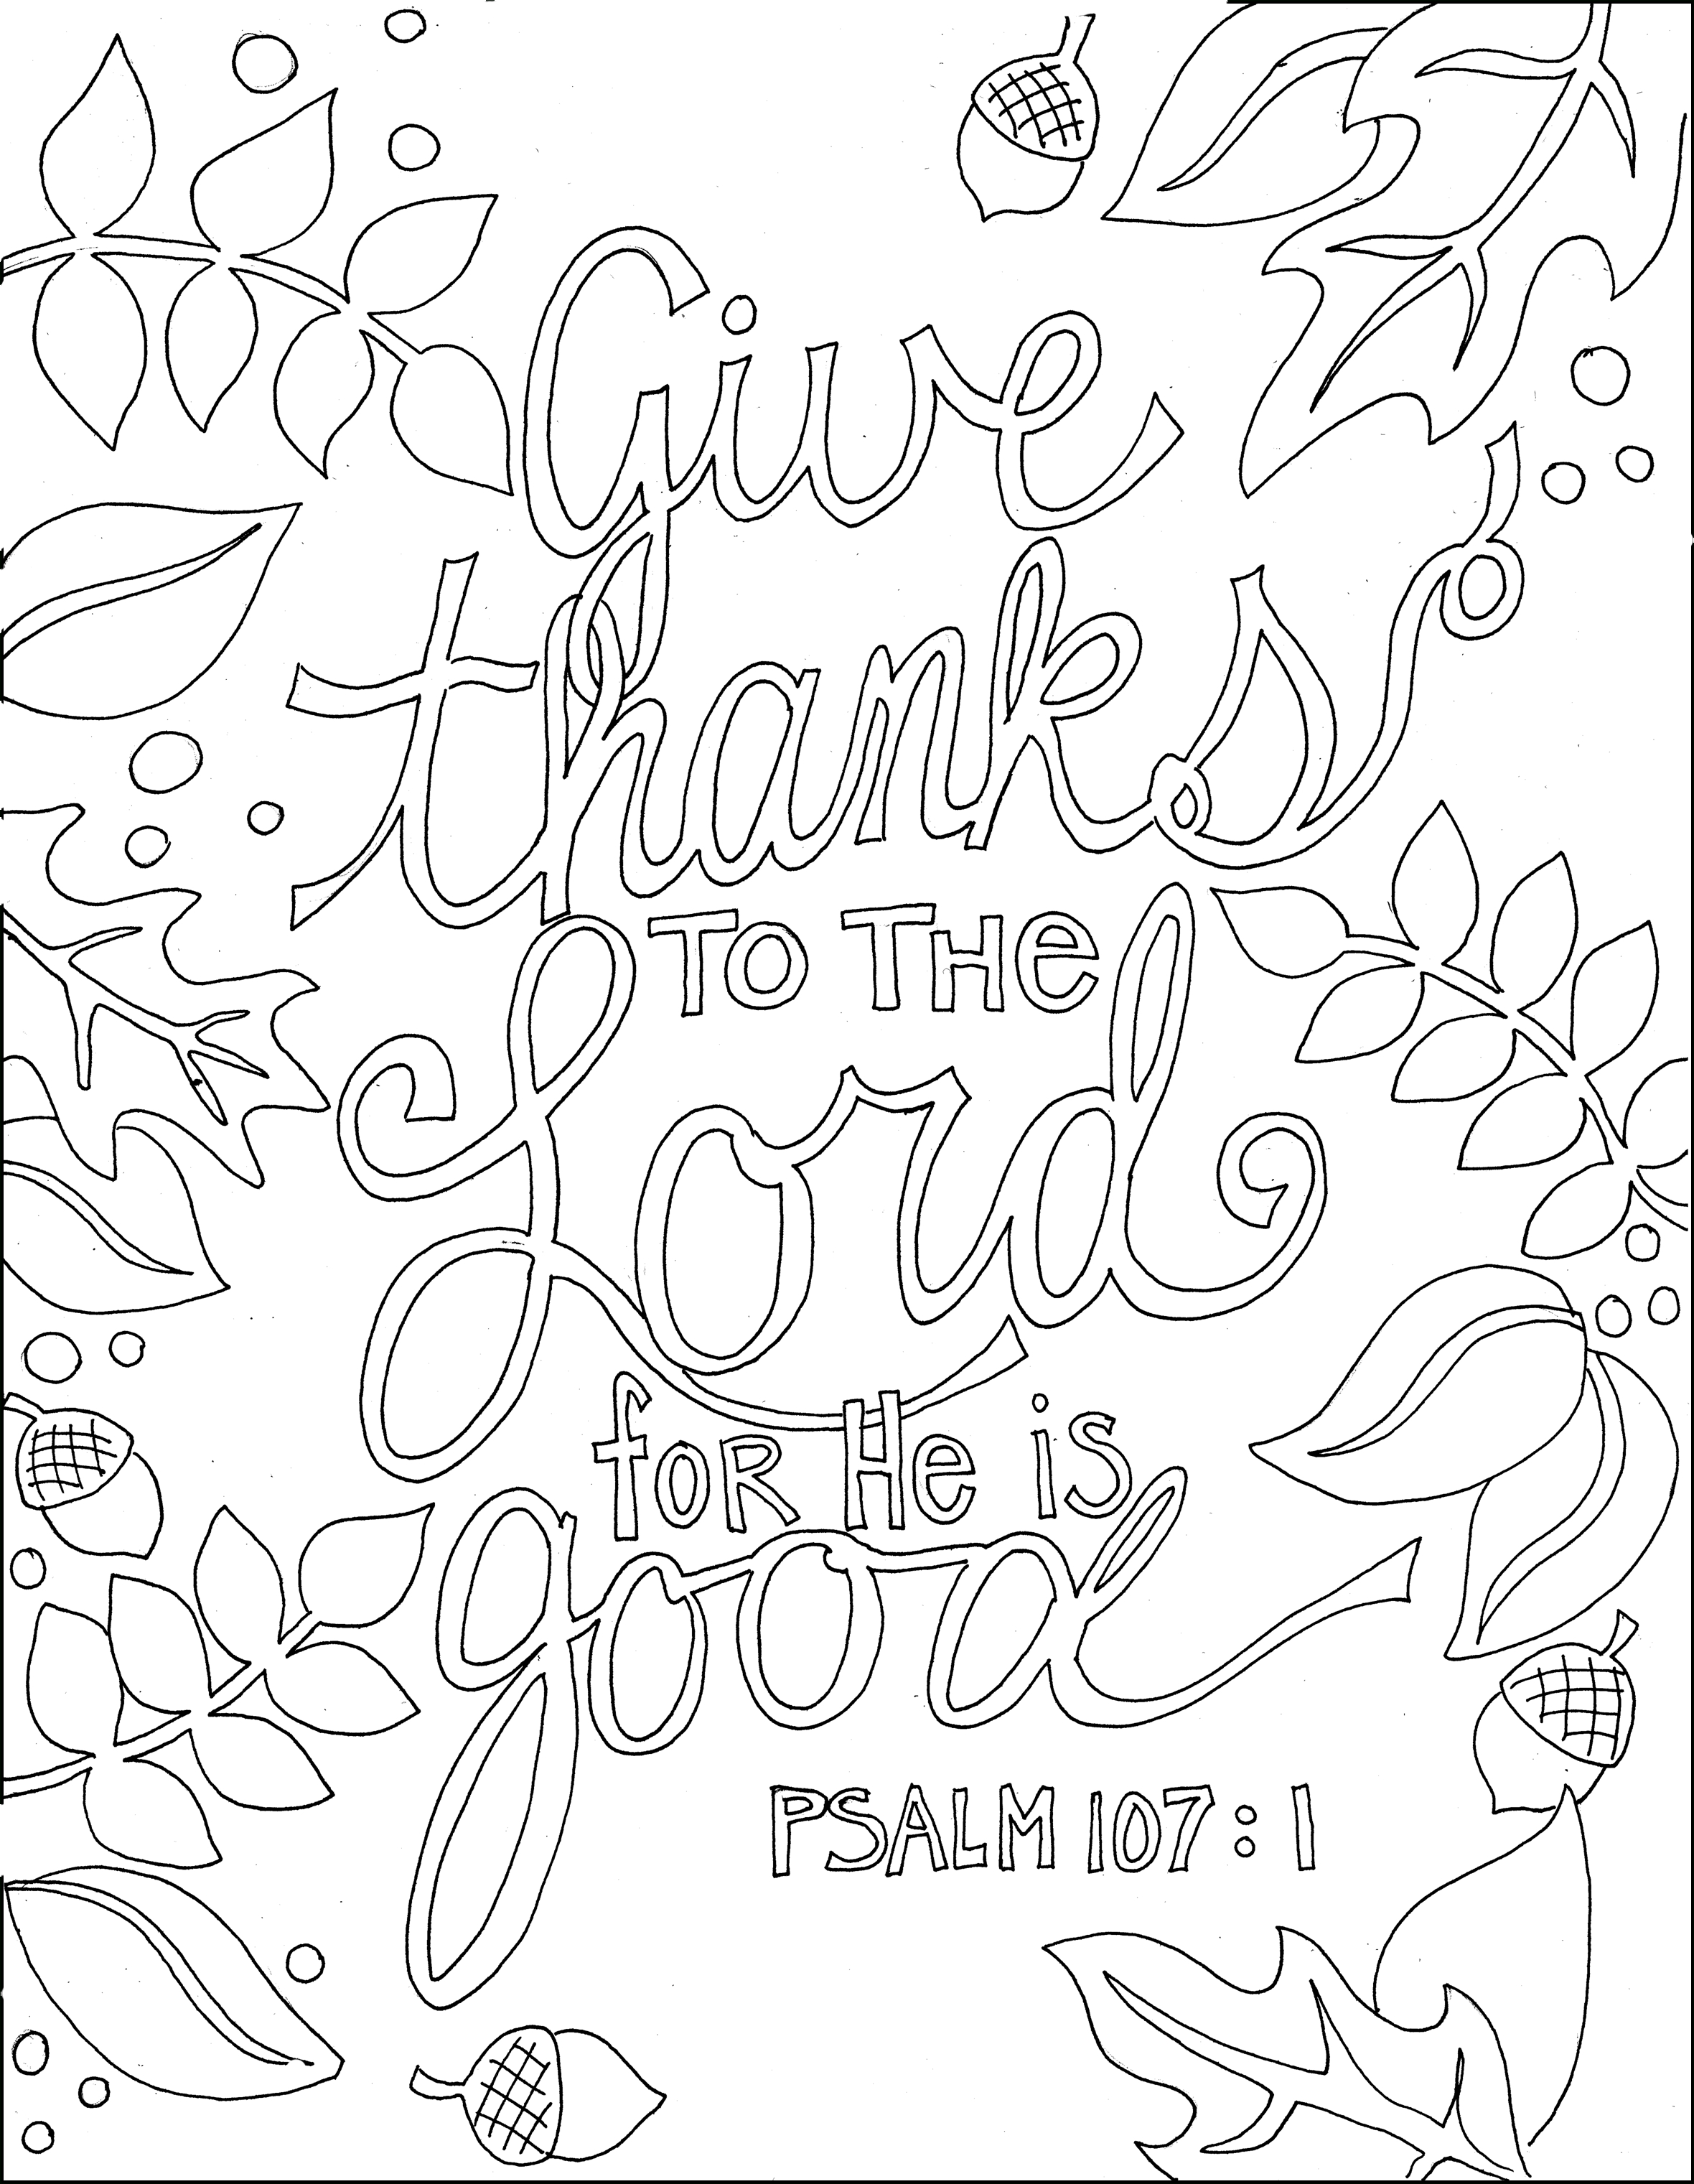 Ps 107.1 | After School Church Ideas | Bible Verse Coloring Page - Free Printable Bible Verses Adults